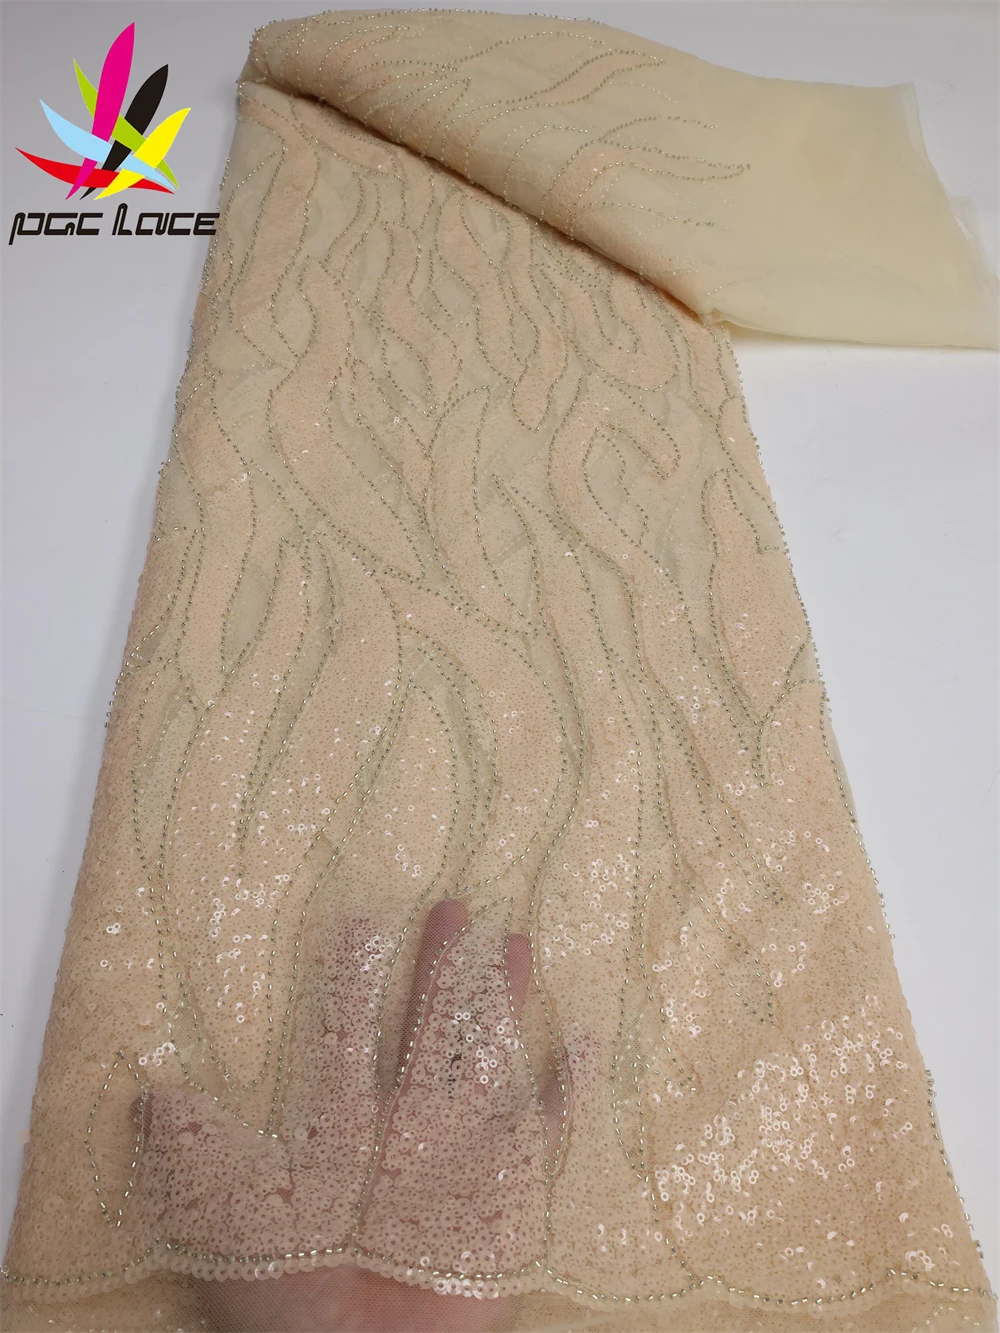 PGC Gold African Groom Lace Fabric 2023 High Quality French Mesh Lace Fabric Sequins Nigerian Lace Fabrics For Wedding pgc african sequins lace fabric french wax lace fabric for bridal material 2022 high quality nigerian lace fabrics ya4889b 6